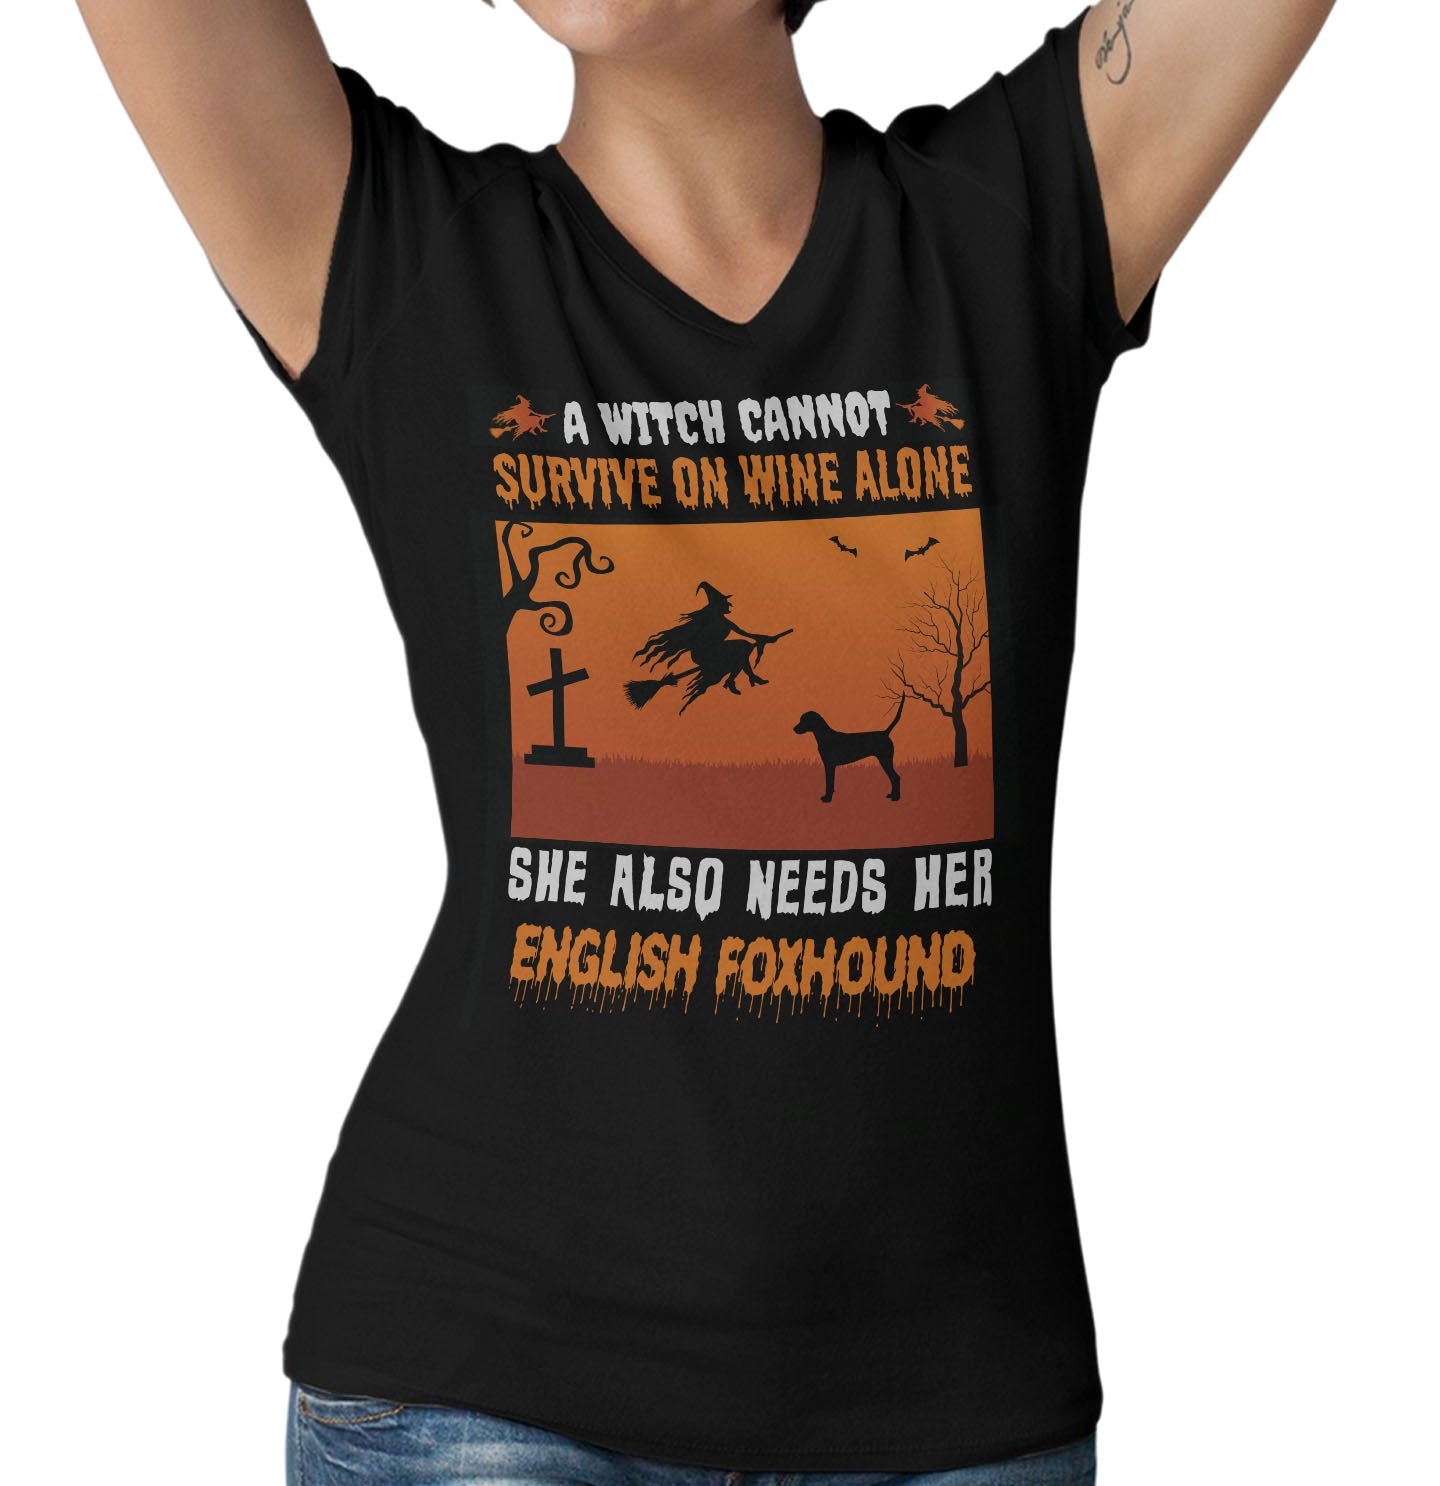 A Witch Needs Her English Foxhound - Women's V-Neck T-Shirt